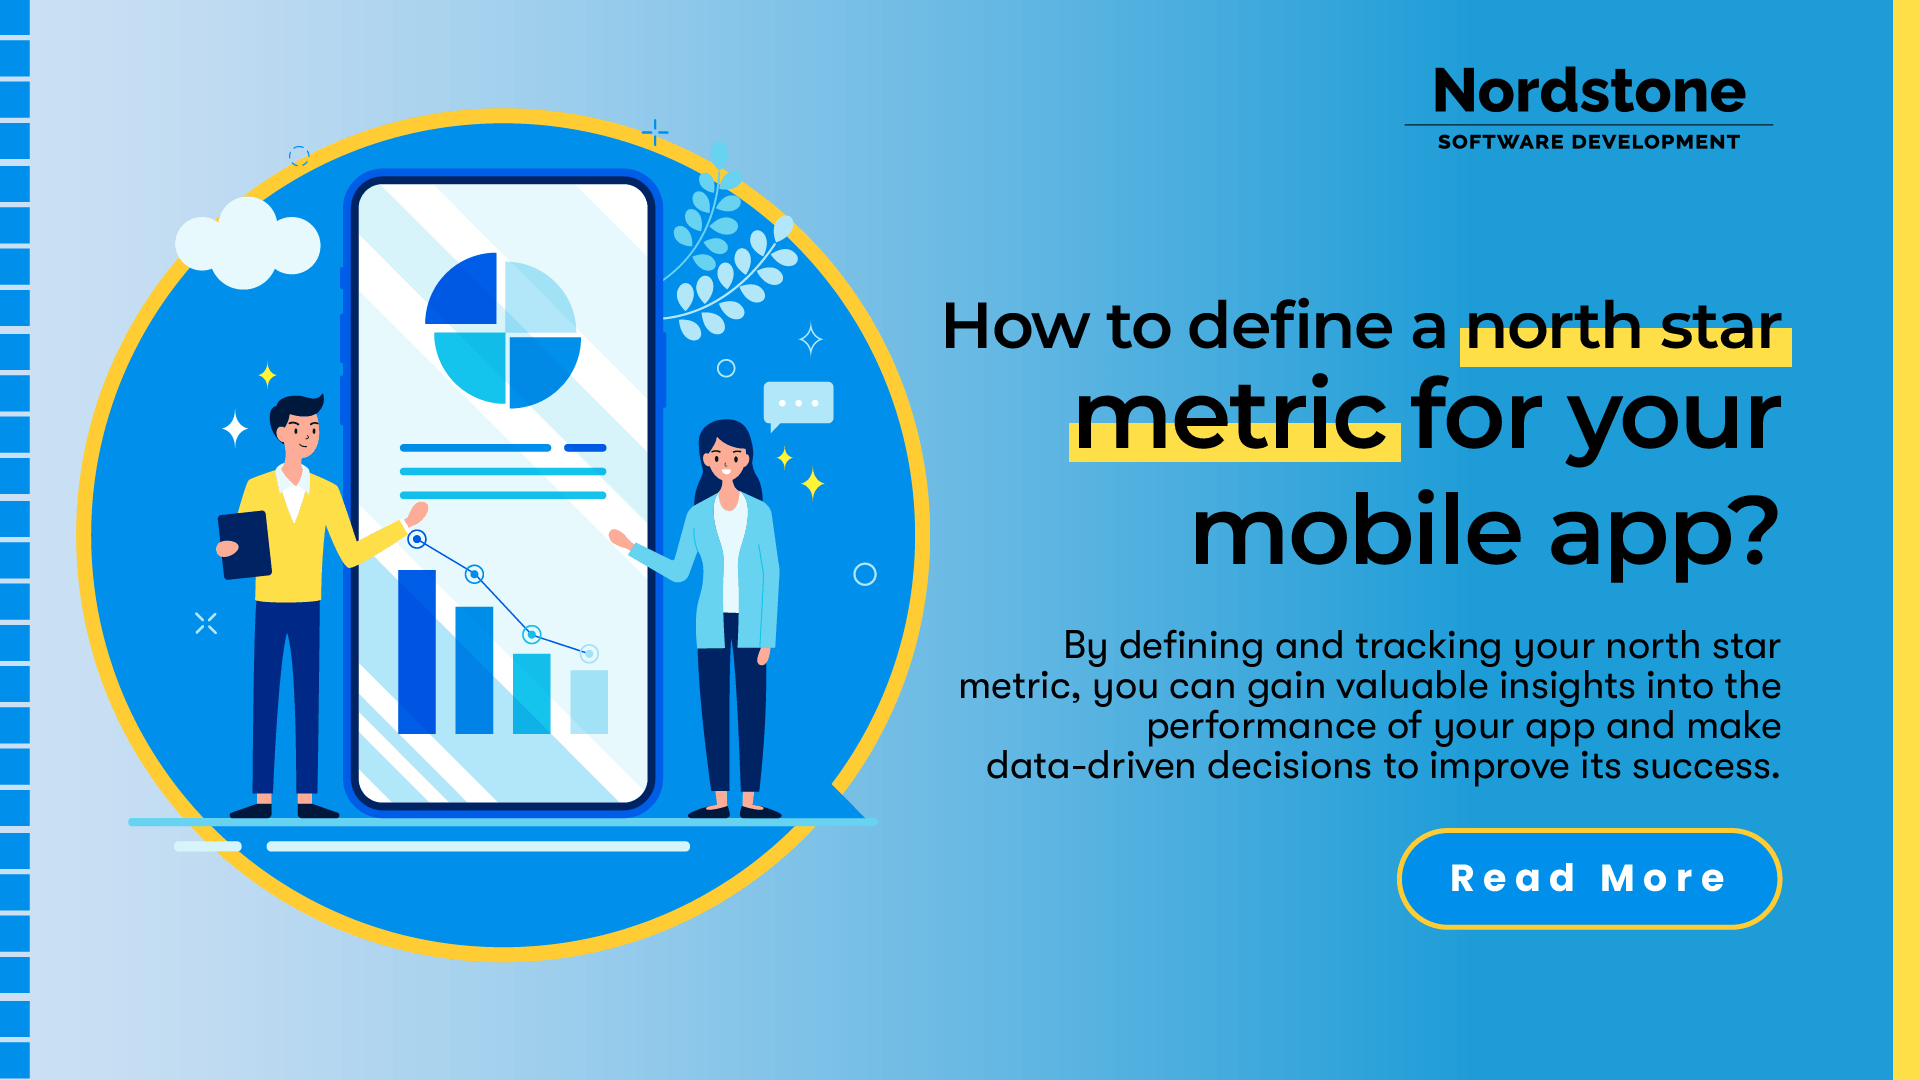 How to achieve Product Market Fit for your mobile app?